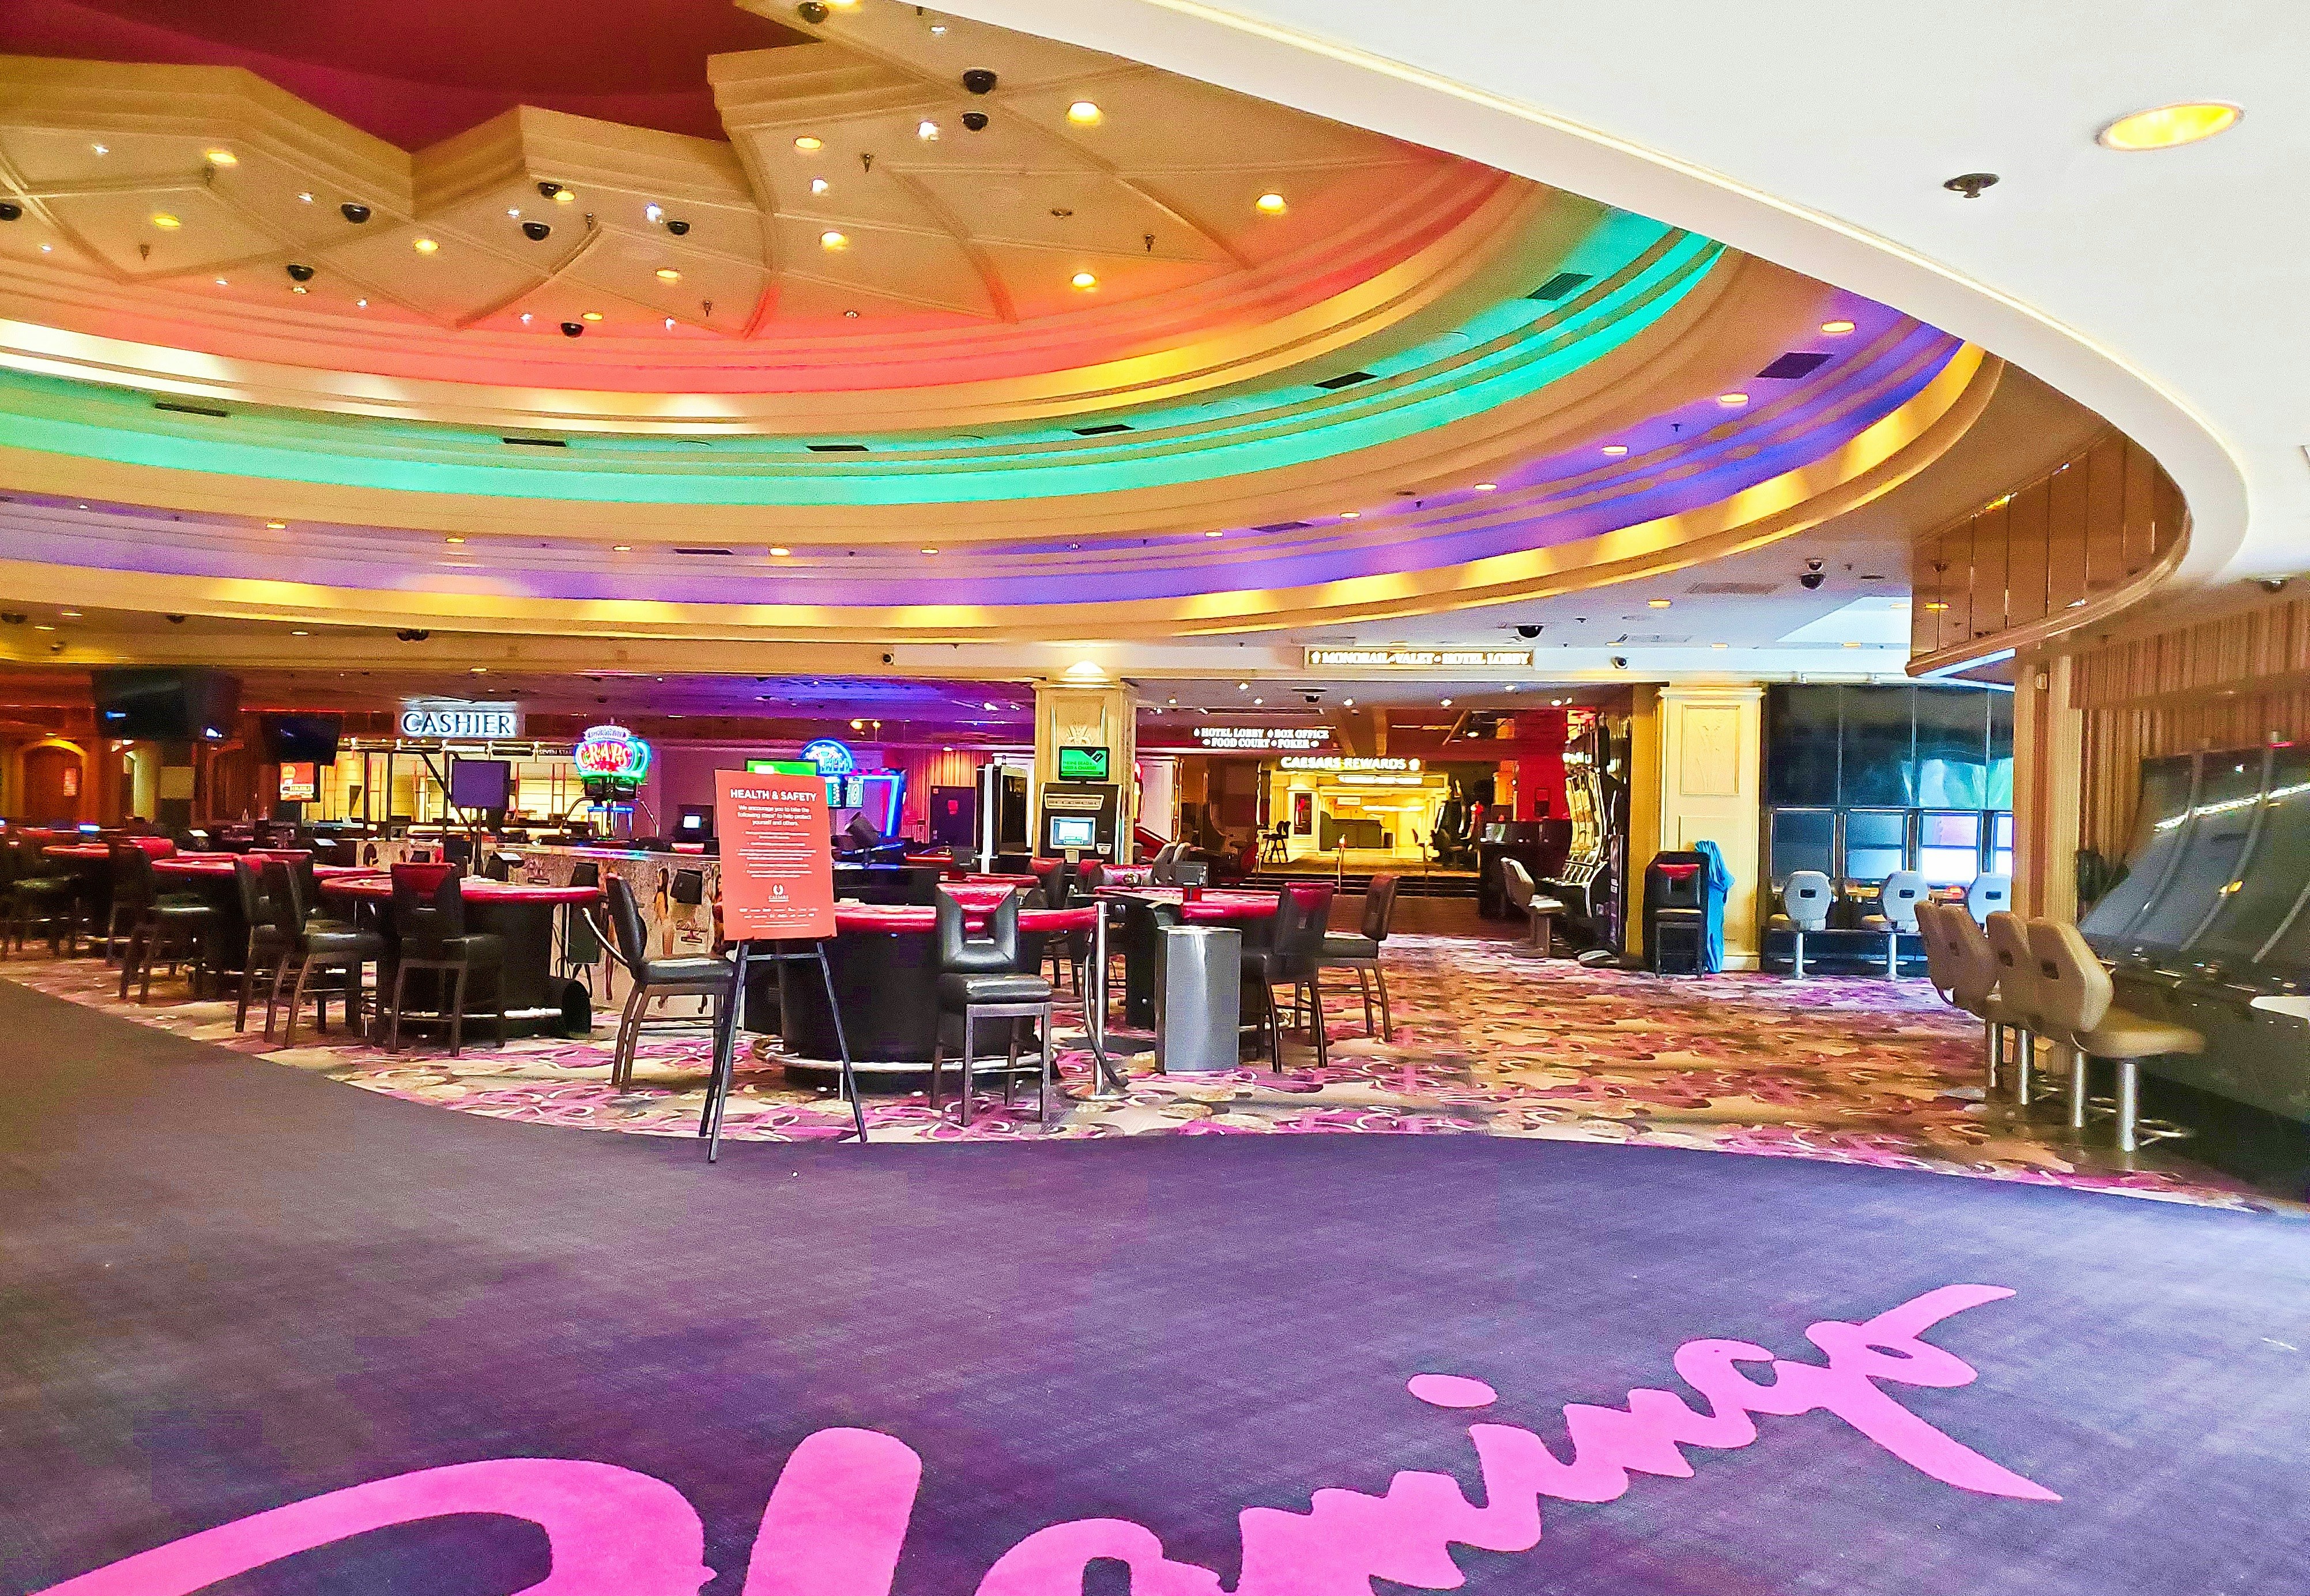 empty Flamingo casino during the day (and during COVID-19 shutdown) in Las Vegas, NV